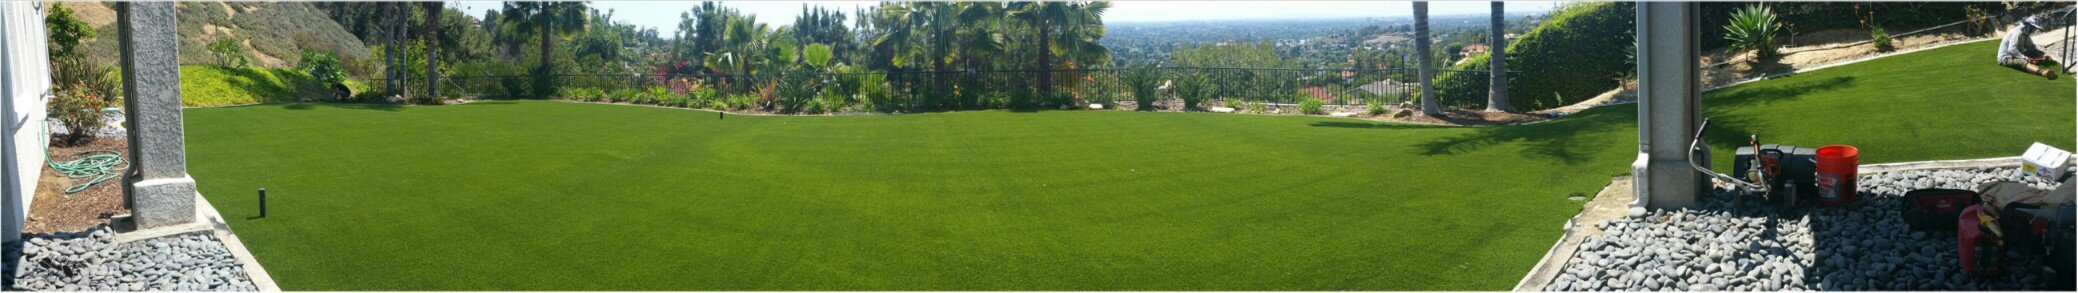 Gallery, Beaumont Artificial Grass & Pavers,